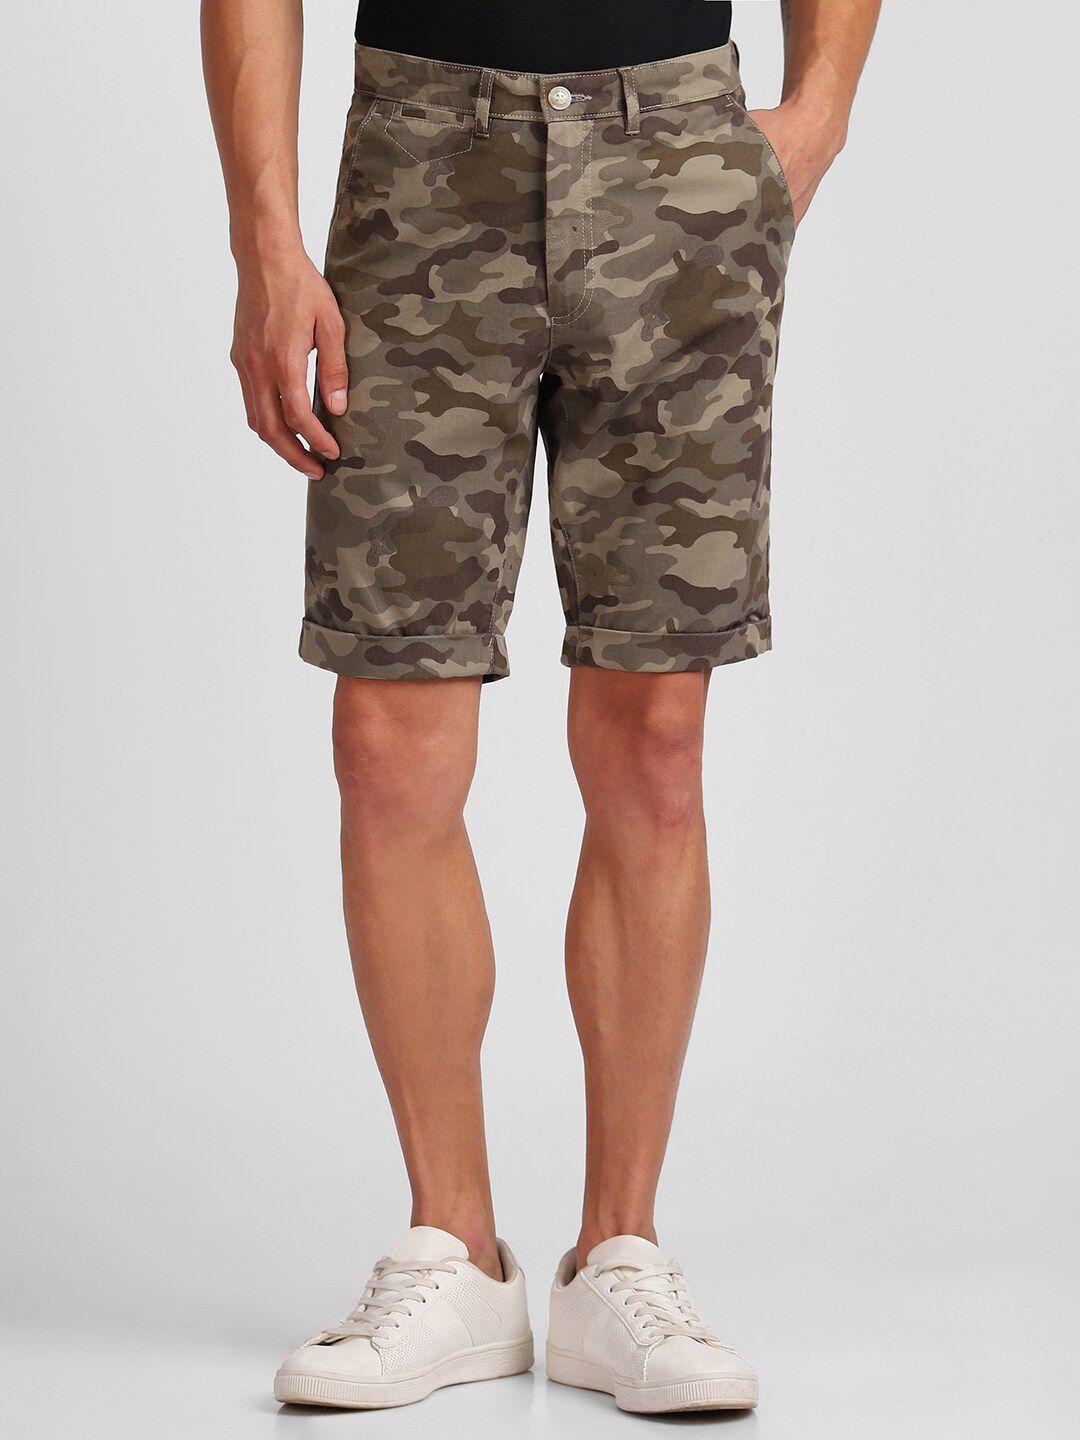 allen solly men camouflage printed slim fit pure cotton shorts